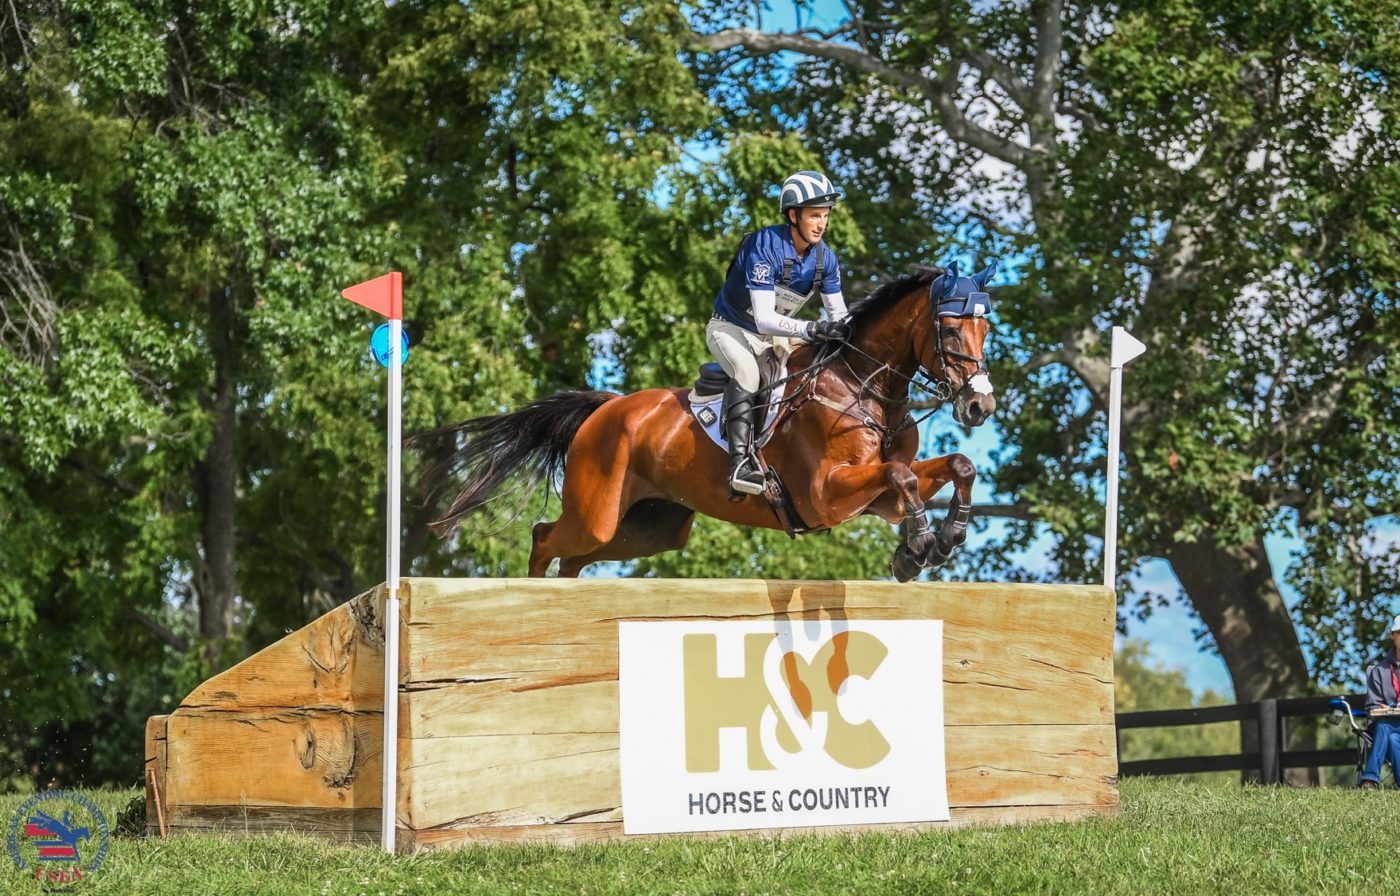 equestrian jumping streaming video